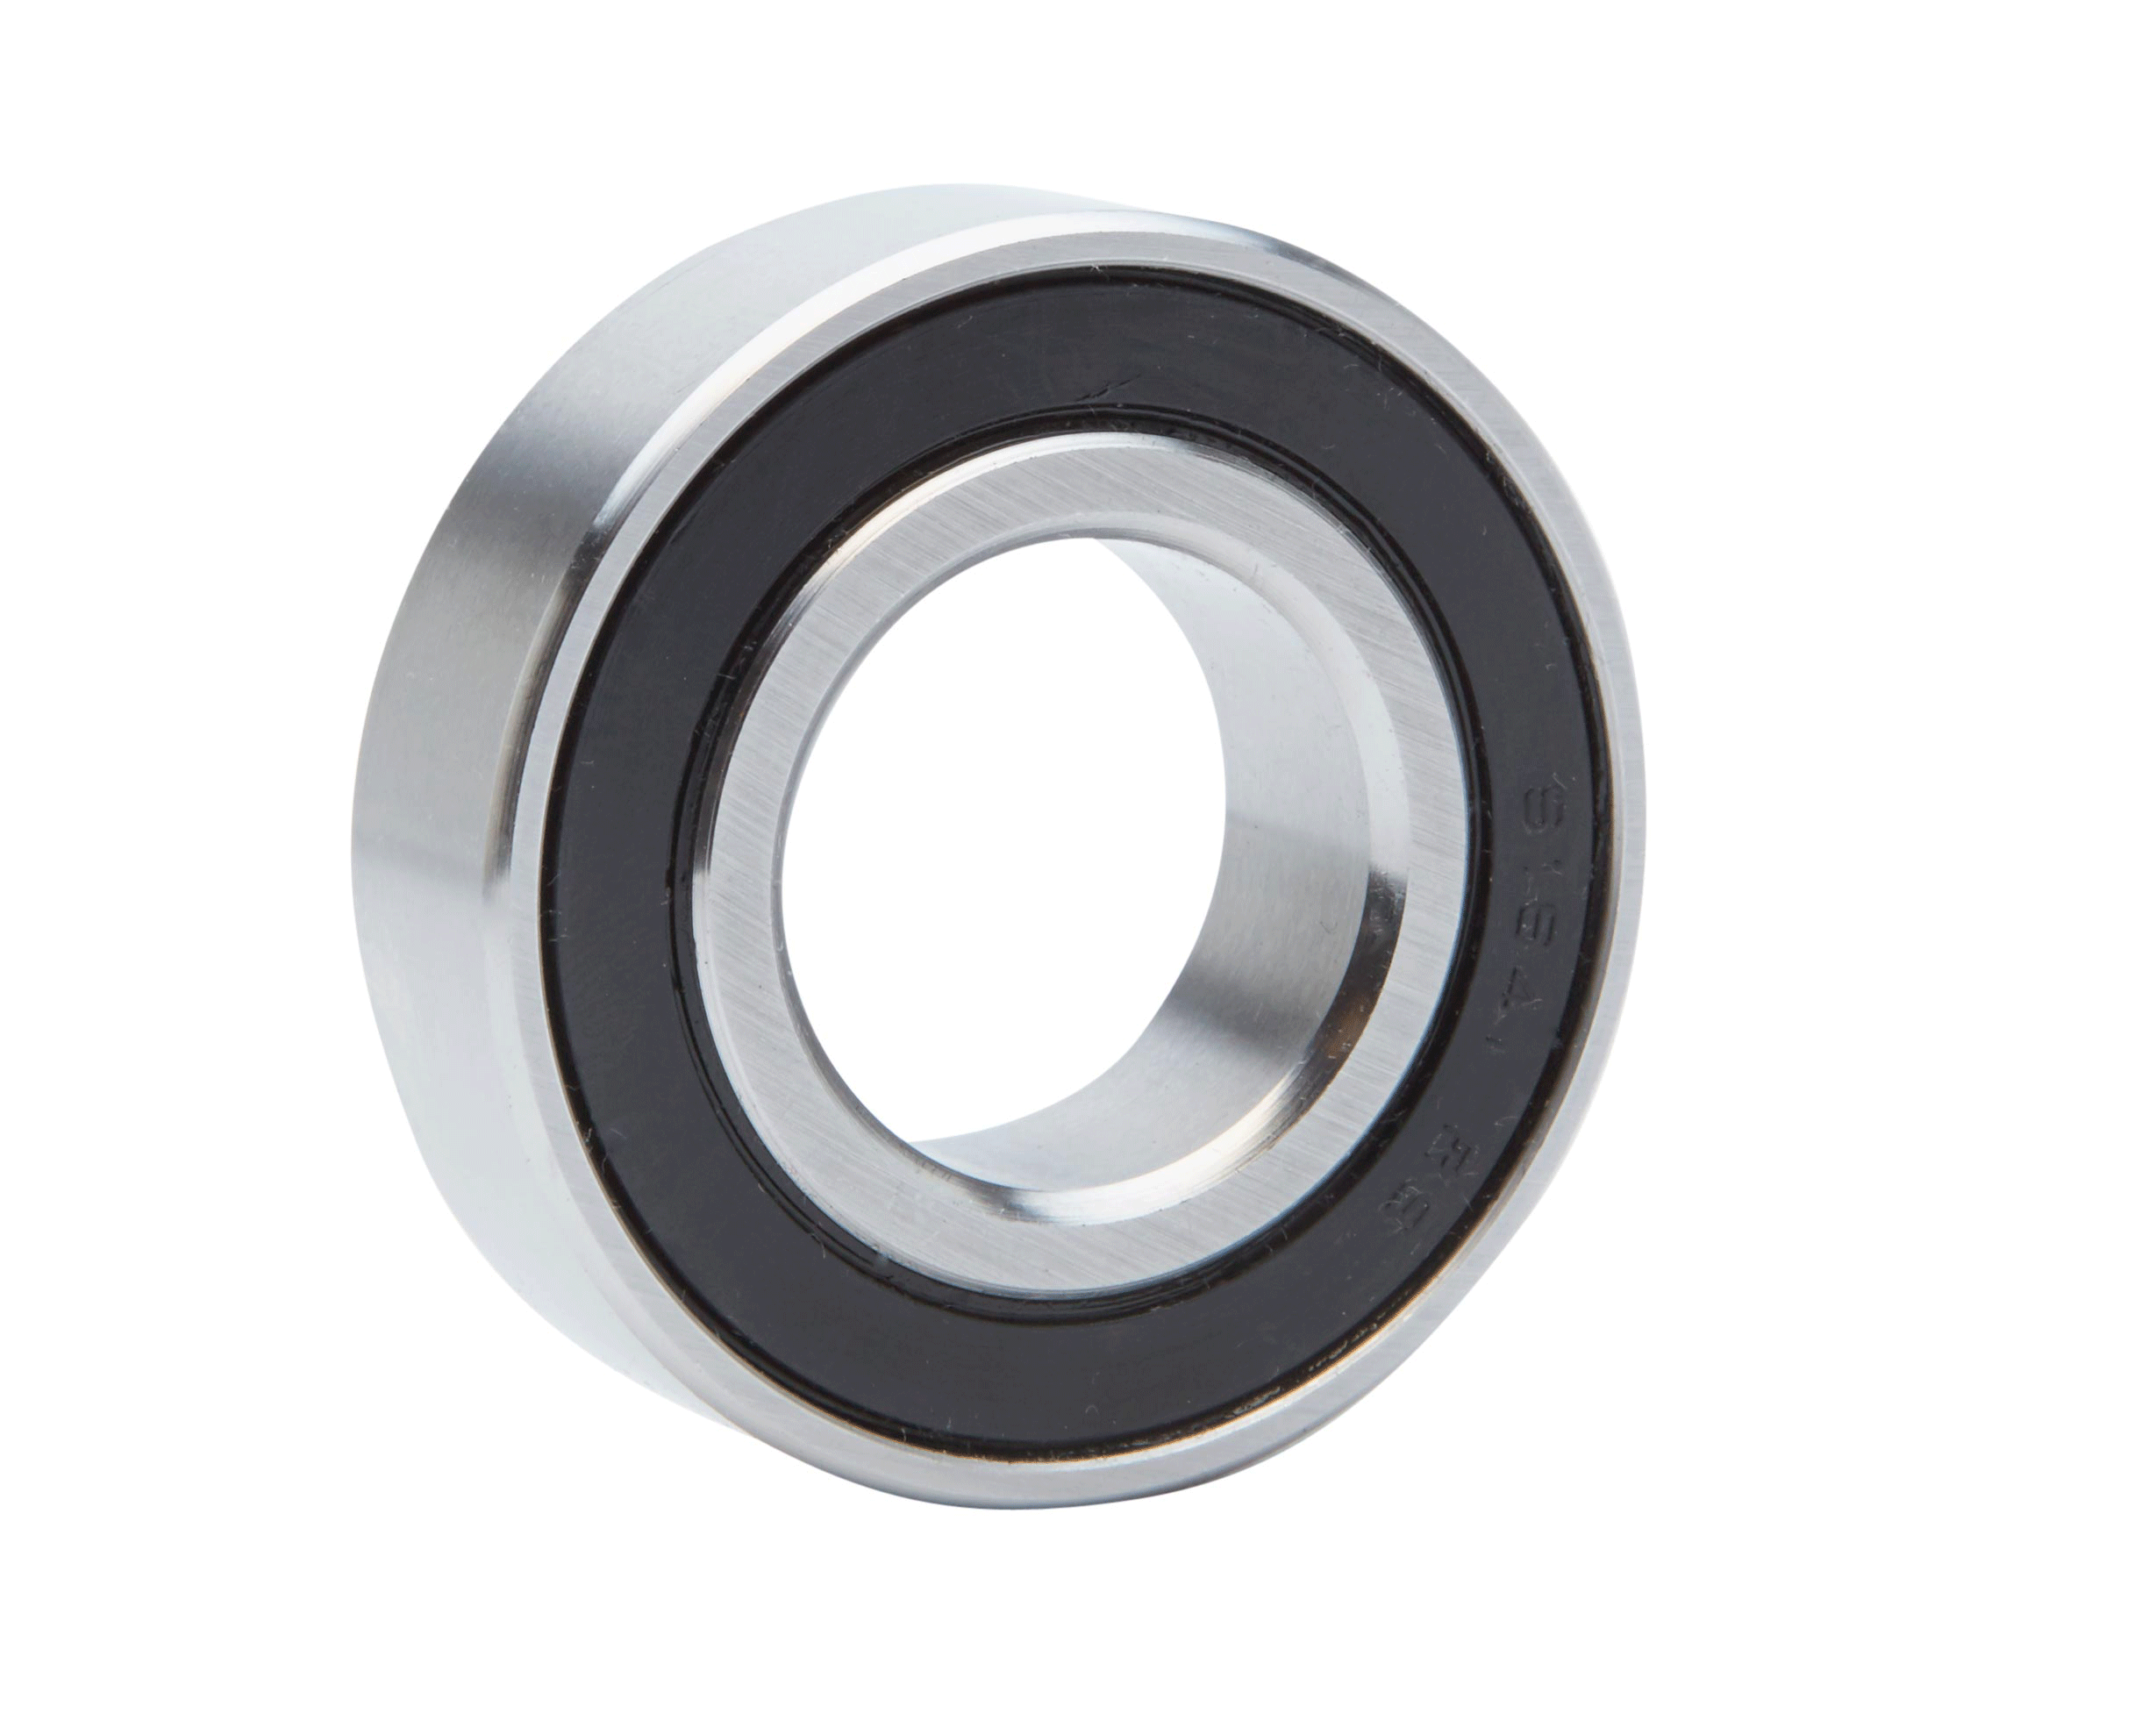 Stainless Steel Ball Bearings 304ss 5/8" Free Shipping USA seller 5/8 inch qty 5 